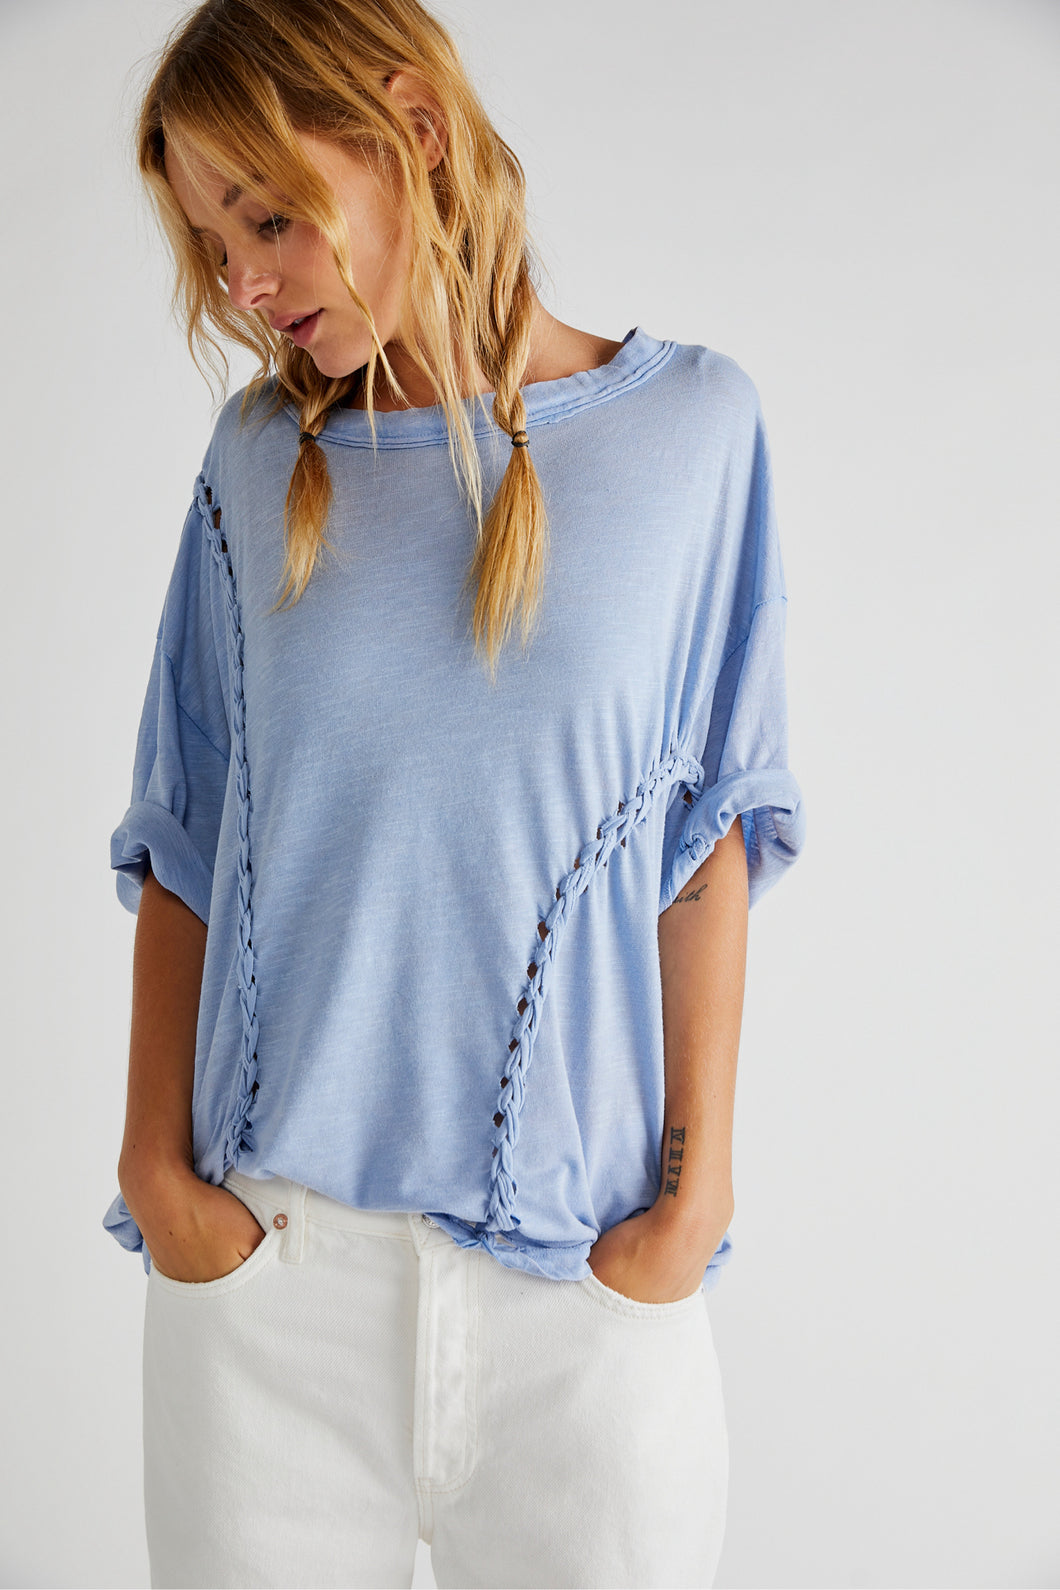 Free People Size X- Small Sky Blue Top- Ladies